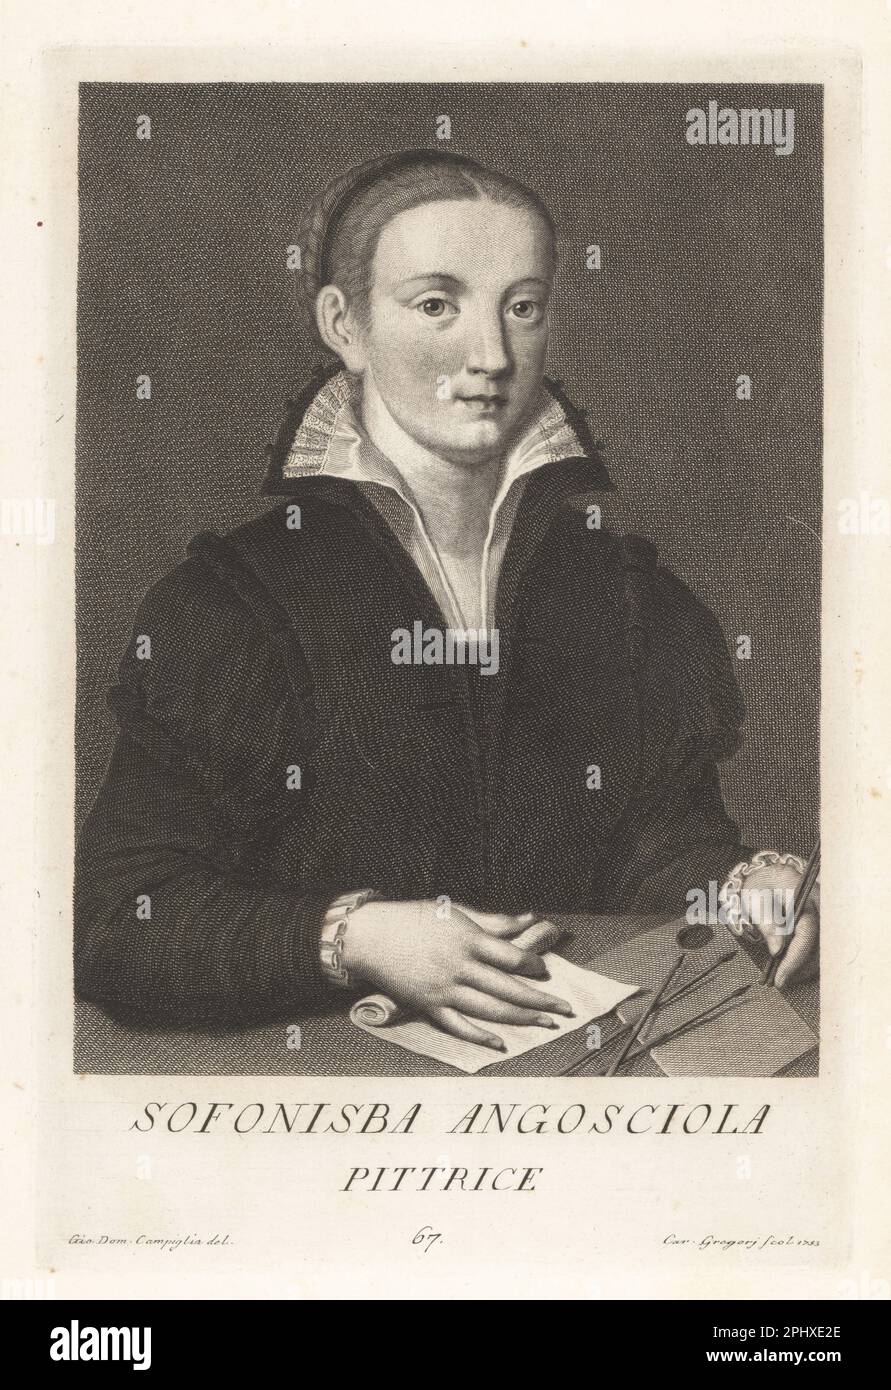 Sofonisba Angosciola, or Anguissola, Italian Renaissance painter born in Cremona, 1535-1625. Eminent portrait and history painter, one of six sisters. Sophonisba Anguisciola, pittrice. Copperplate engraving by Carlo Gregori after Giovanni Domenico Campiglia after a self portrait by the artist from Francesco Moucke's Museo Florentino (Museum Florentinum), Serie di Ritratti de Pittori (Series of Portraits of Painters) stamperia Mouckiana, Florence, 1752-62. Stock Photo